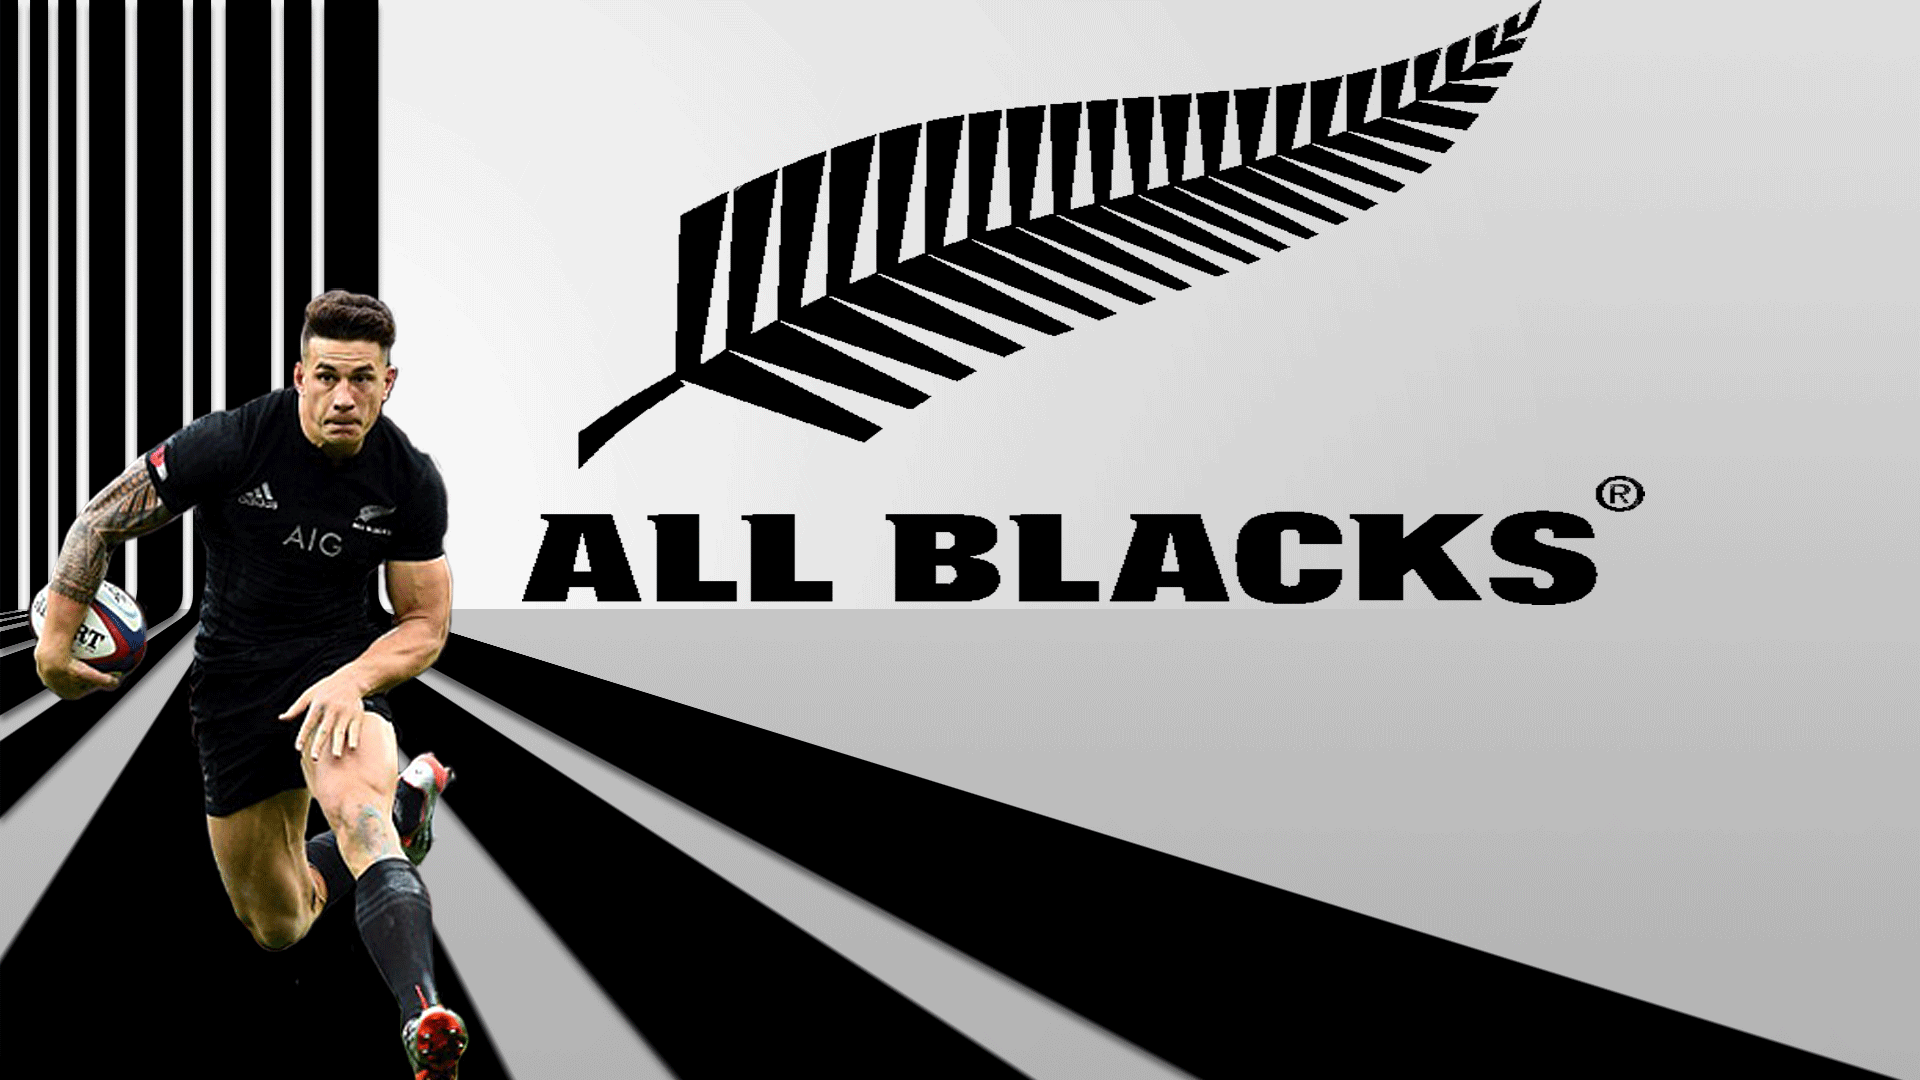 Sonny Bill All Blacks Rugby wallpaper 2018 in Rugby